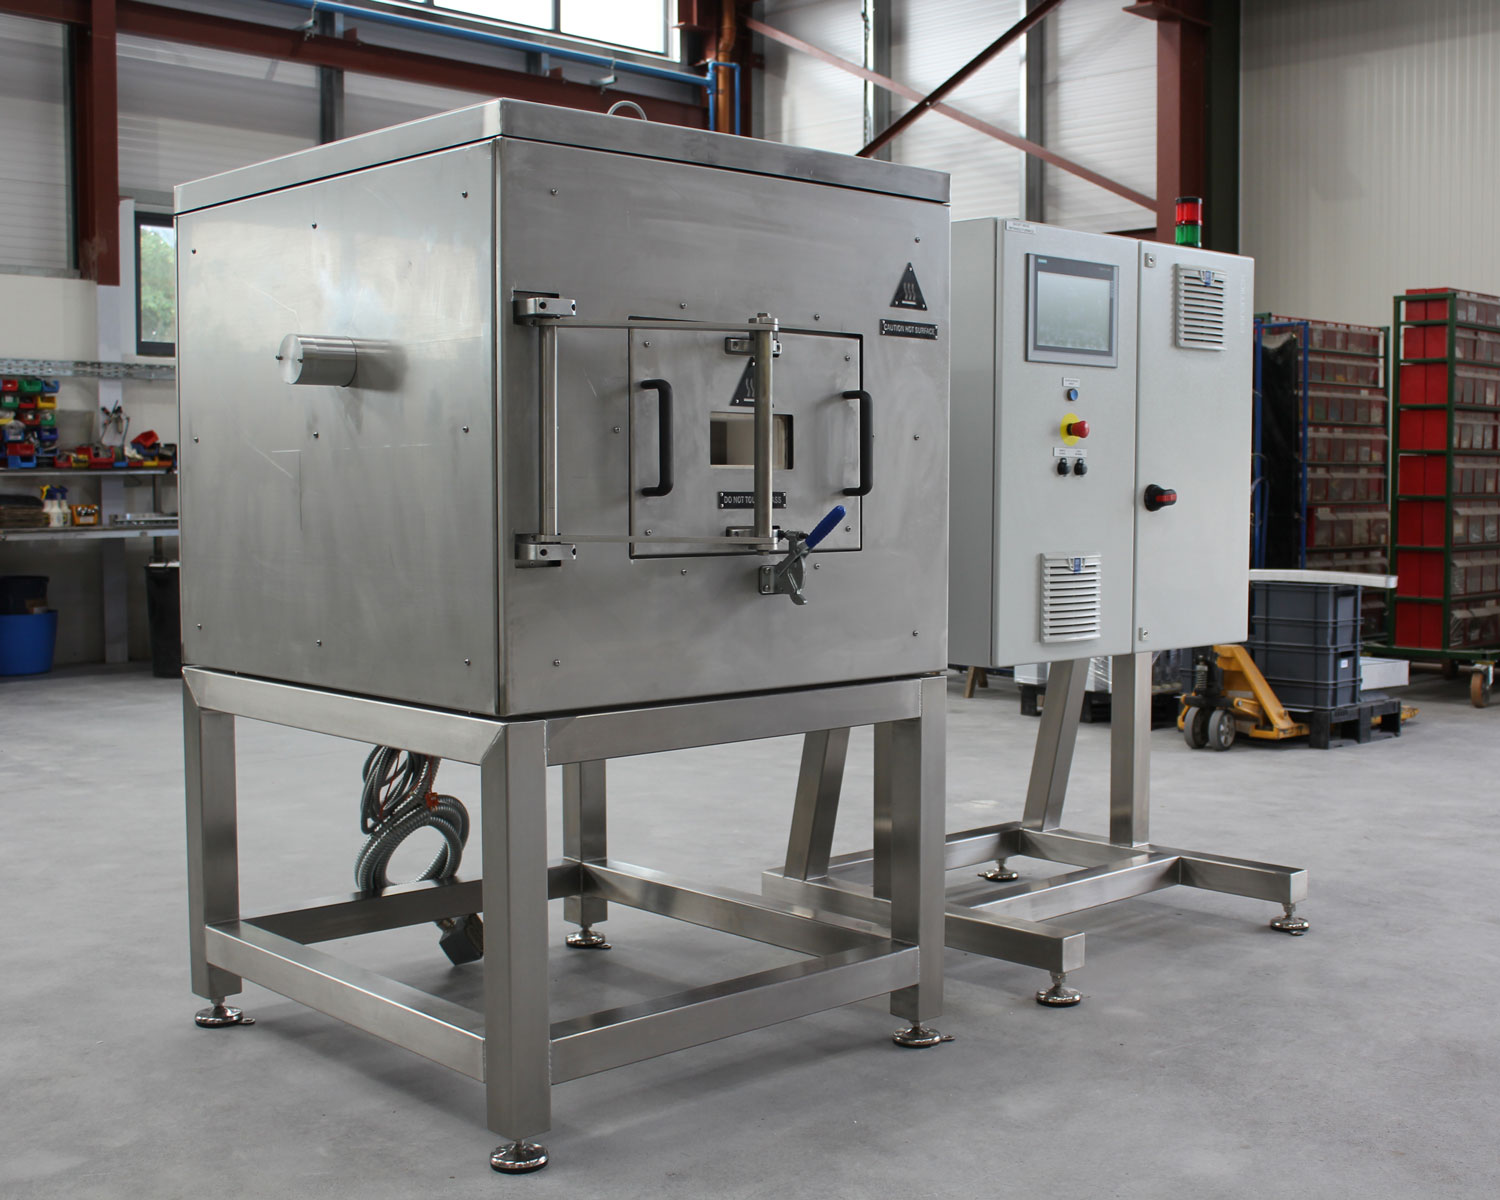 R&D oven for spaceflight manufacturer - heating solutions